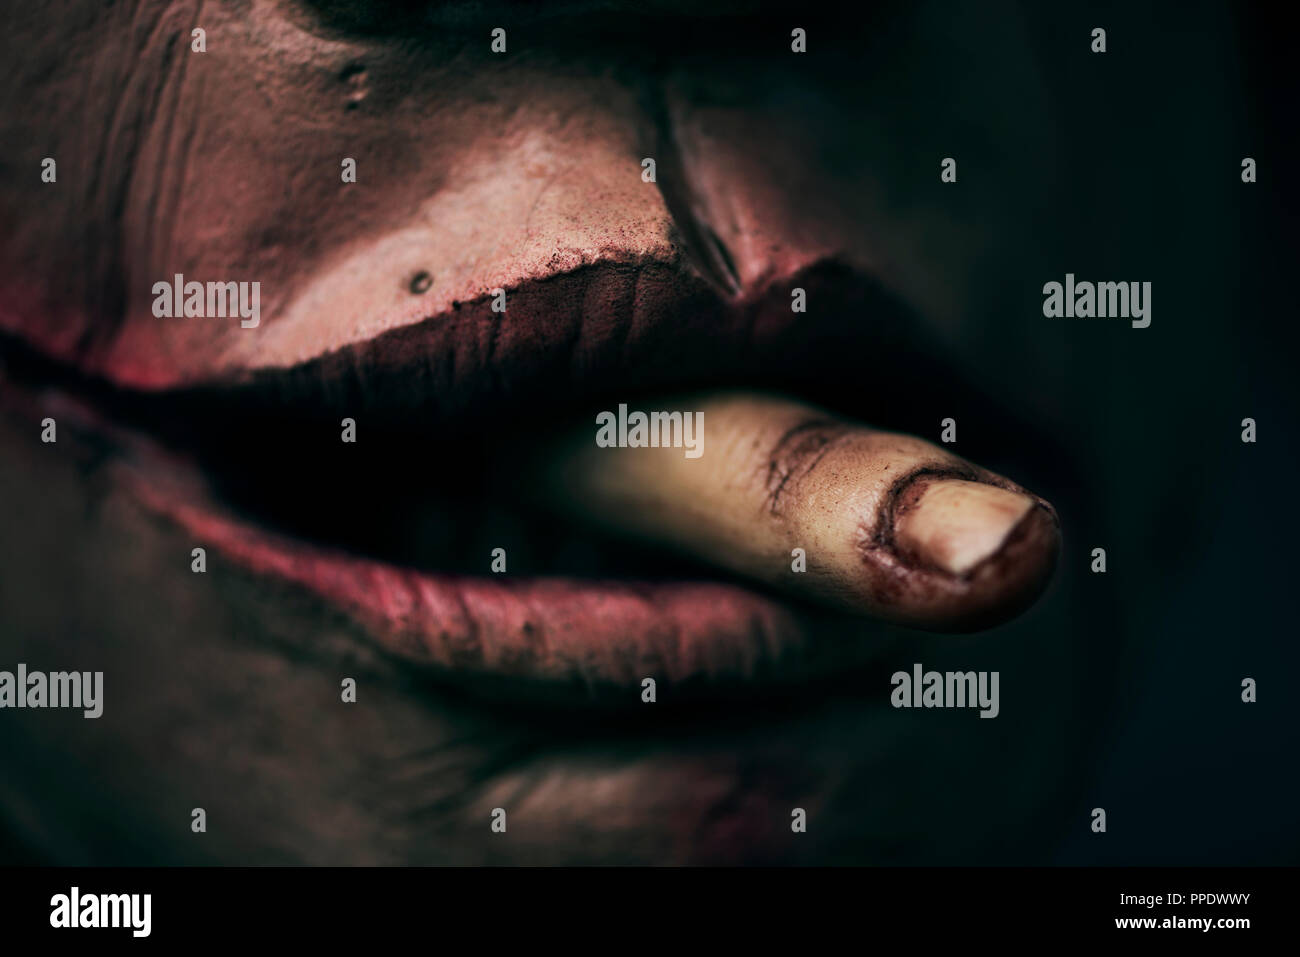 closeup of a scary disfigured man with a bloody amputated finger emerging from his mouth Stock Photo